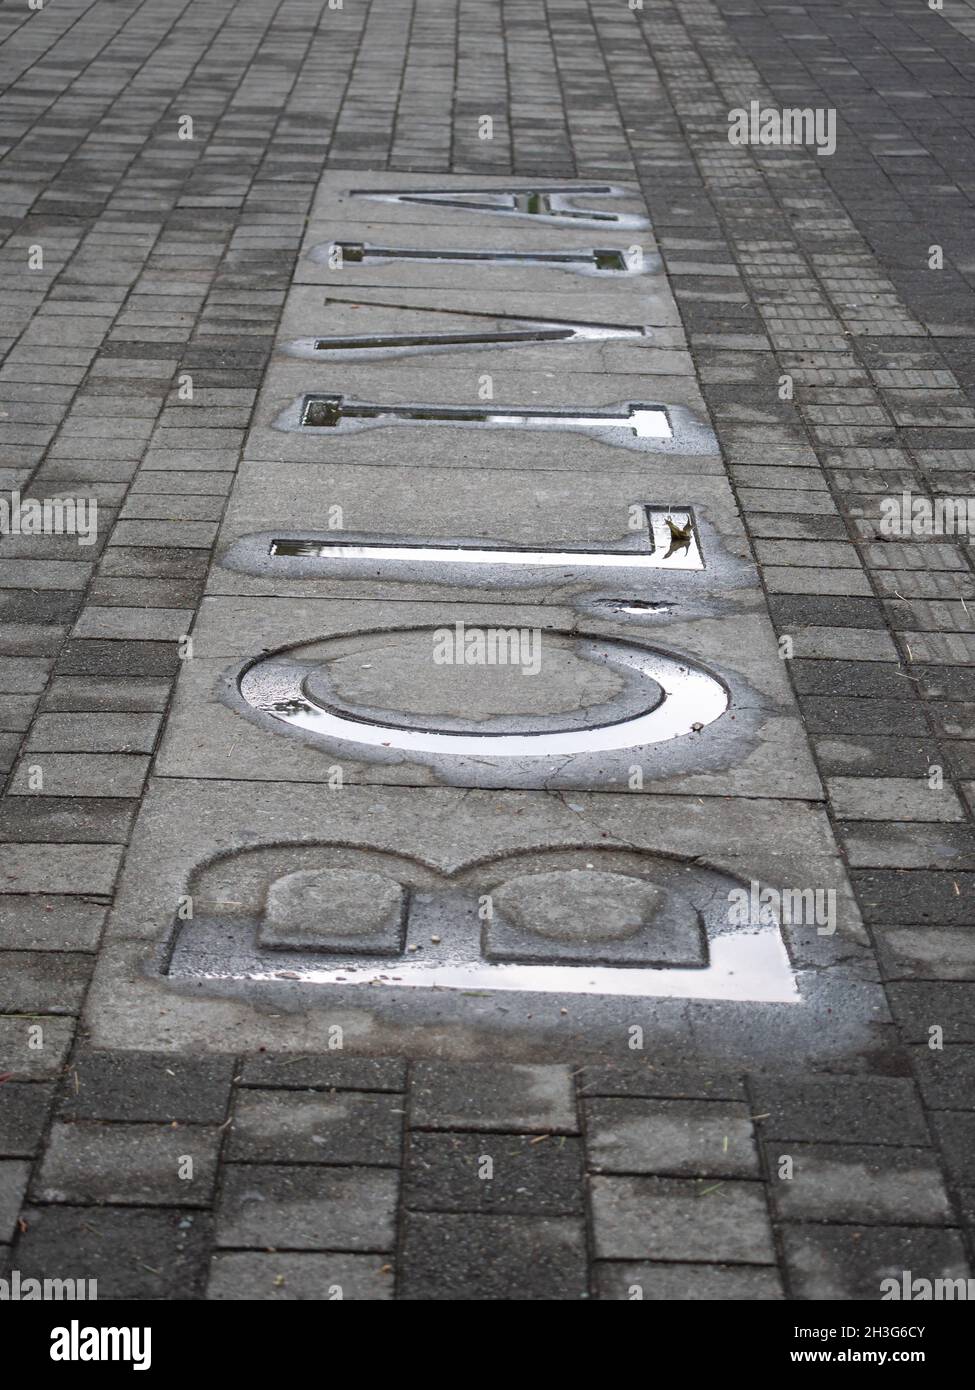 Bolivia, Country Name Written in Large Letters on a Wet Cement Floor in a Public Park Stock Photo